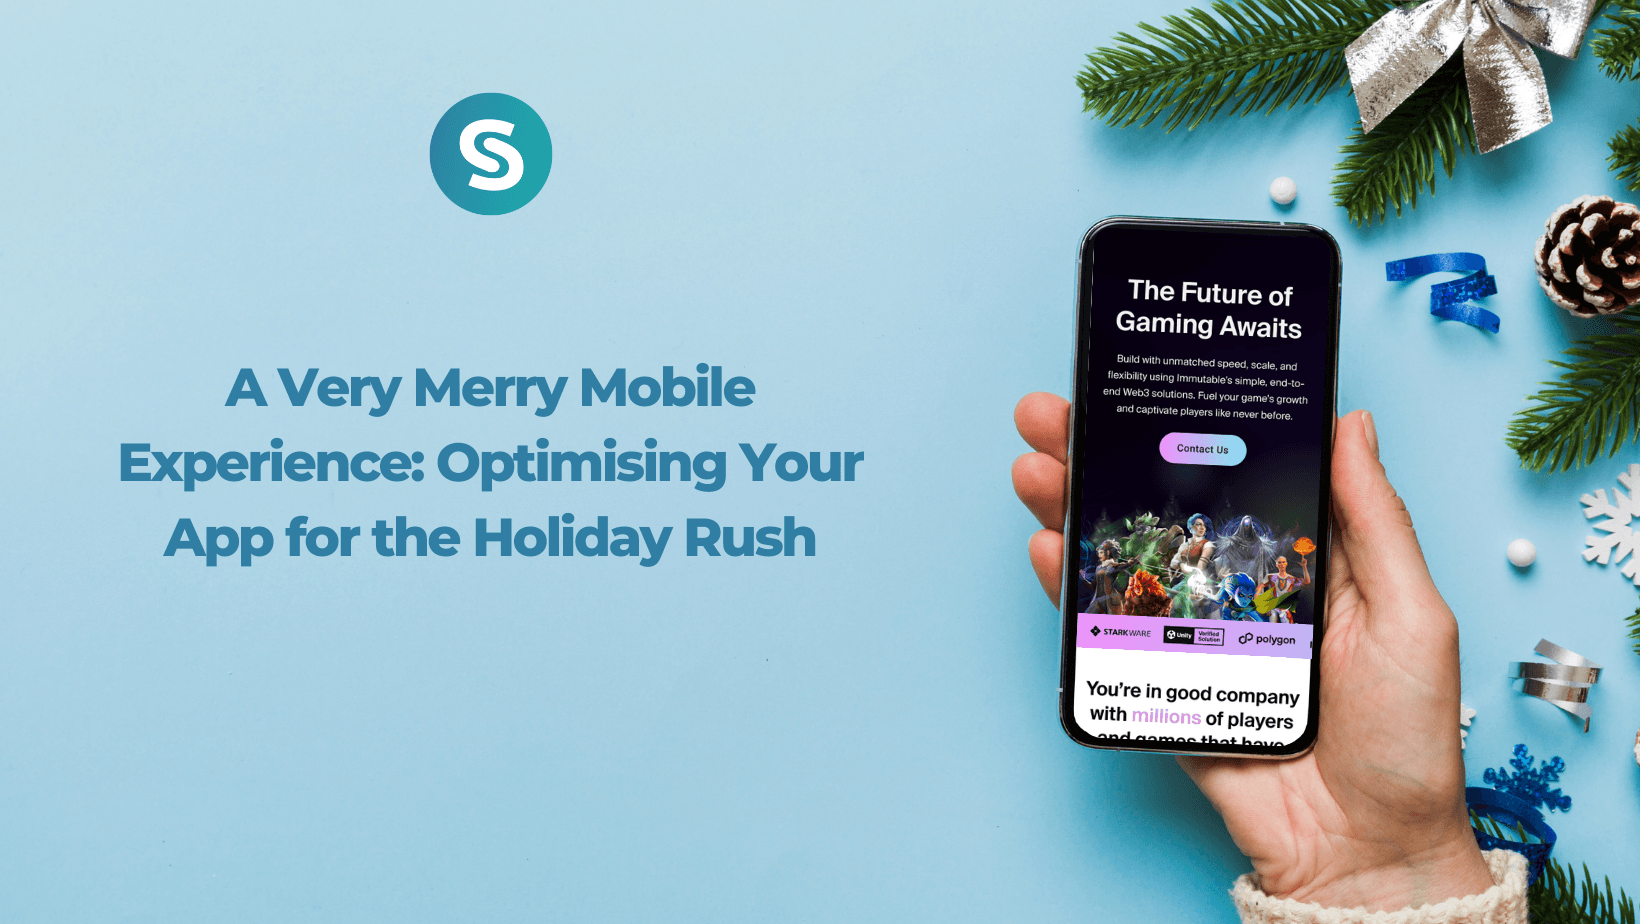 A Very Merry Mobile Experience: Optimising Your App for the Holiday Rush